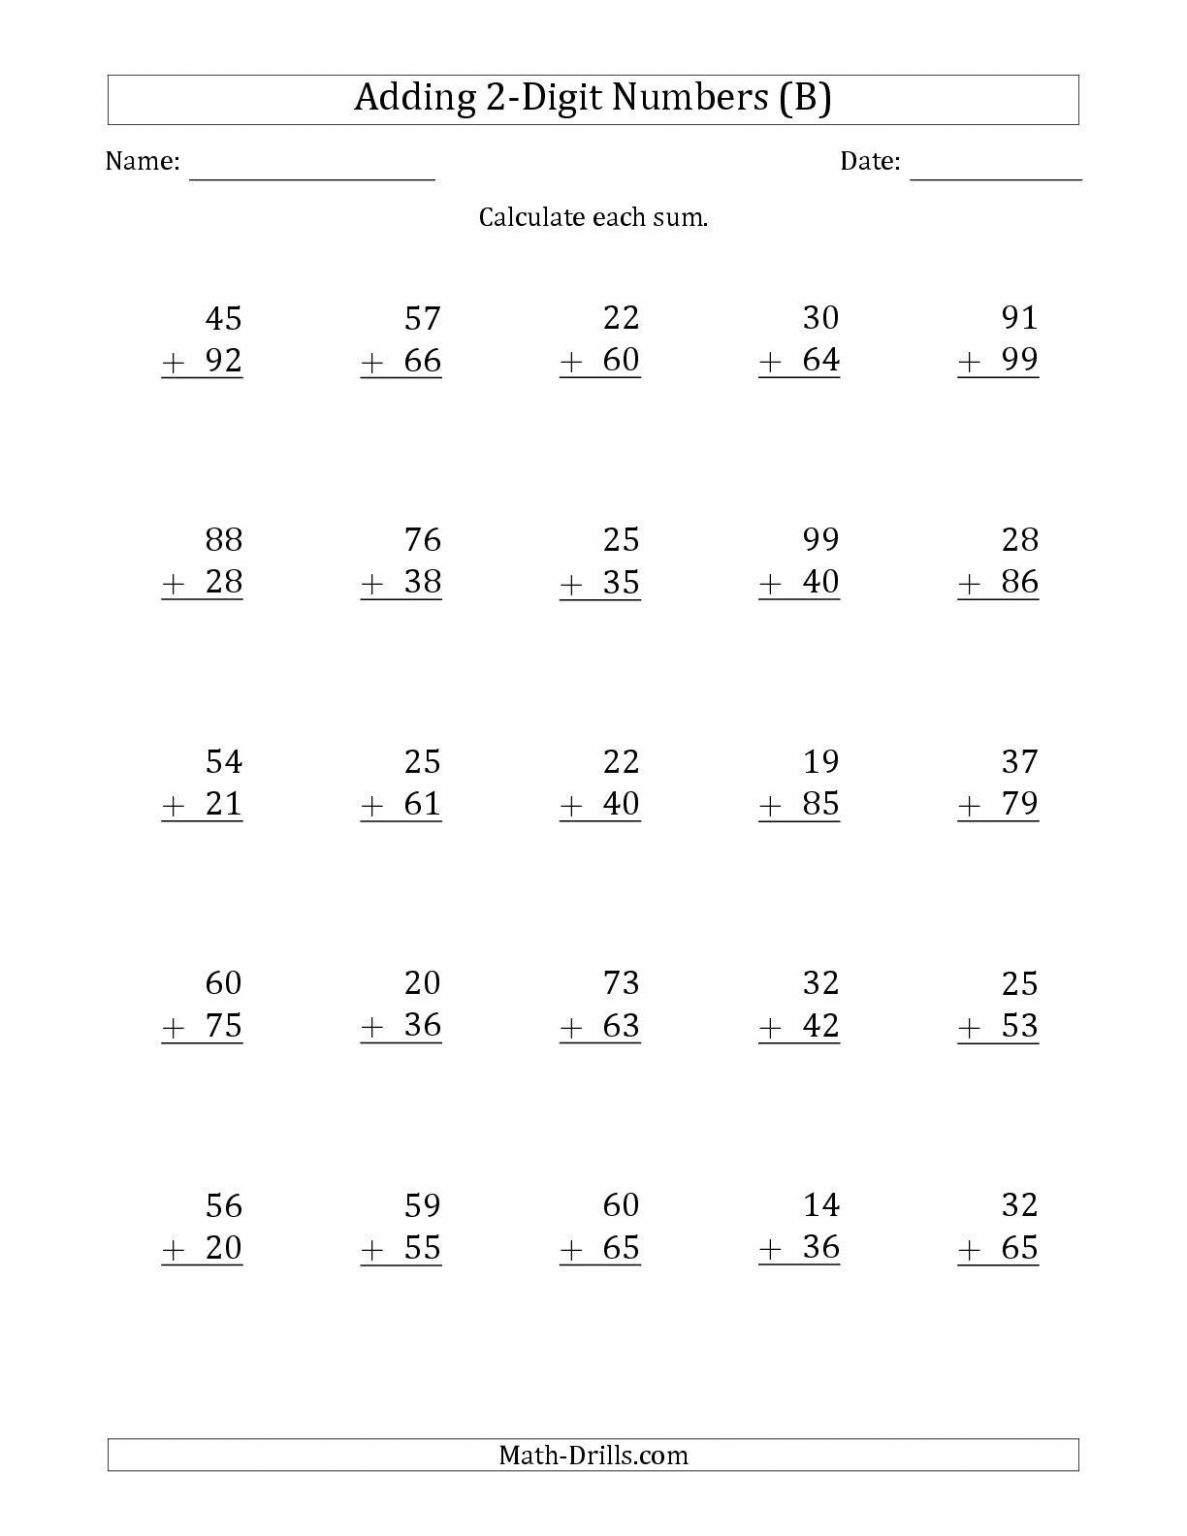 3-free-math-worksheets-first-grade-1-place-value-adding-whole-tens-and-ones-missing-addend-amp